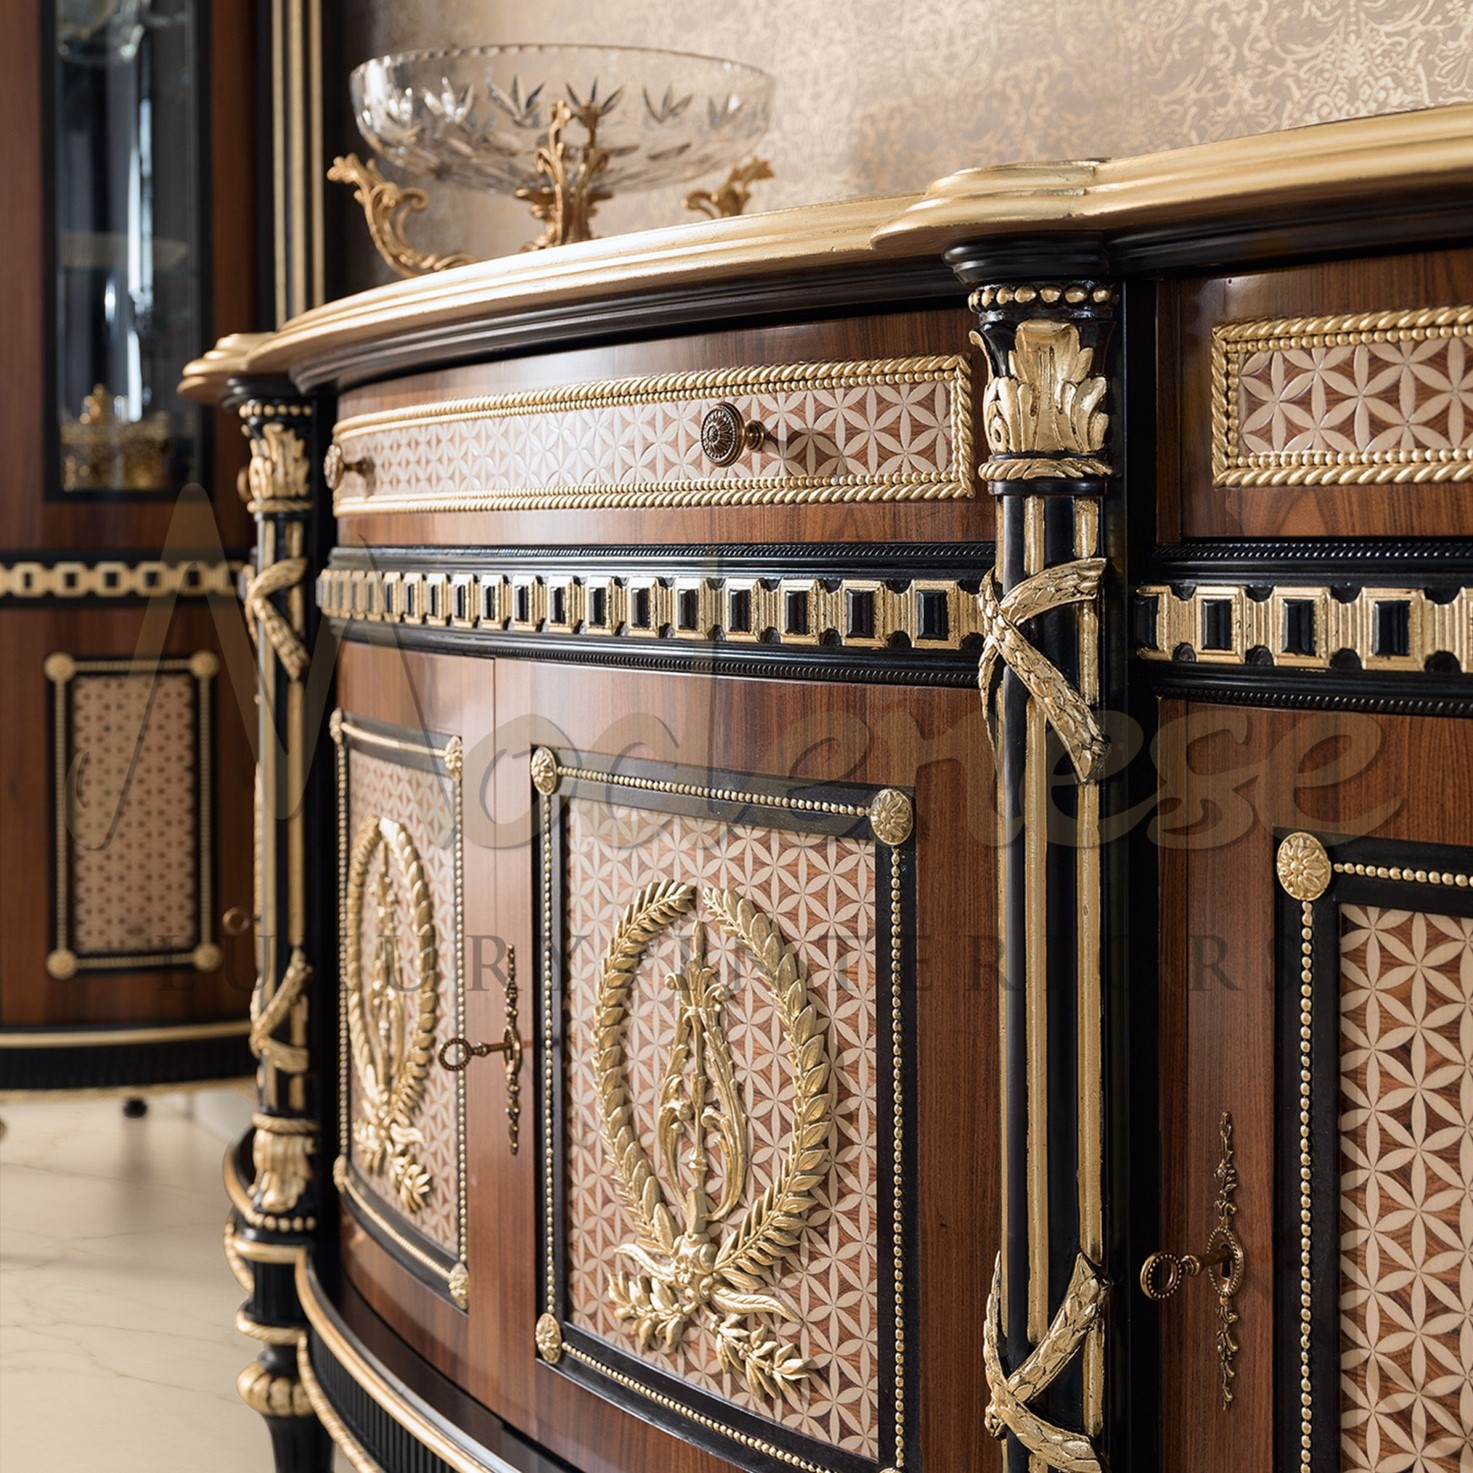 Bespoke Furniture by Modenese Luxury Interiors – Its all about details